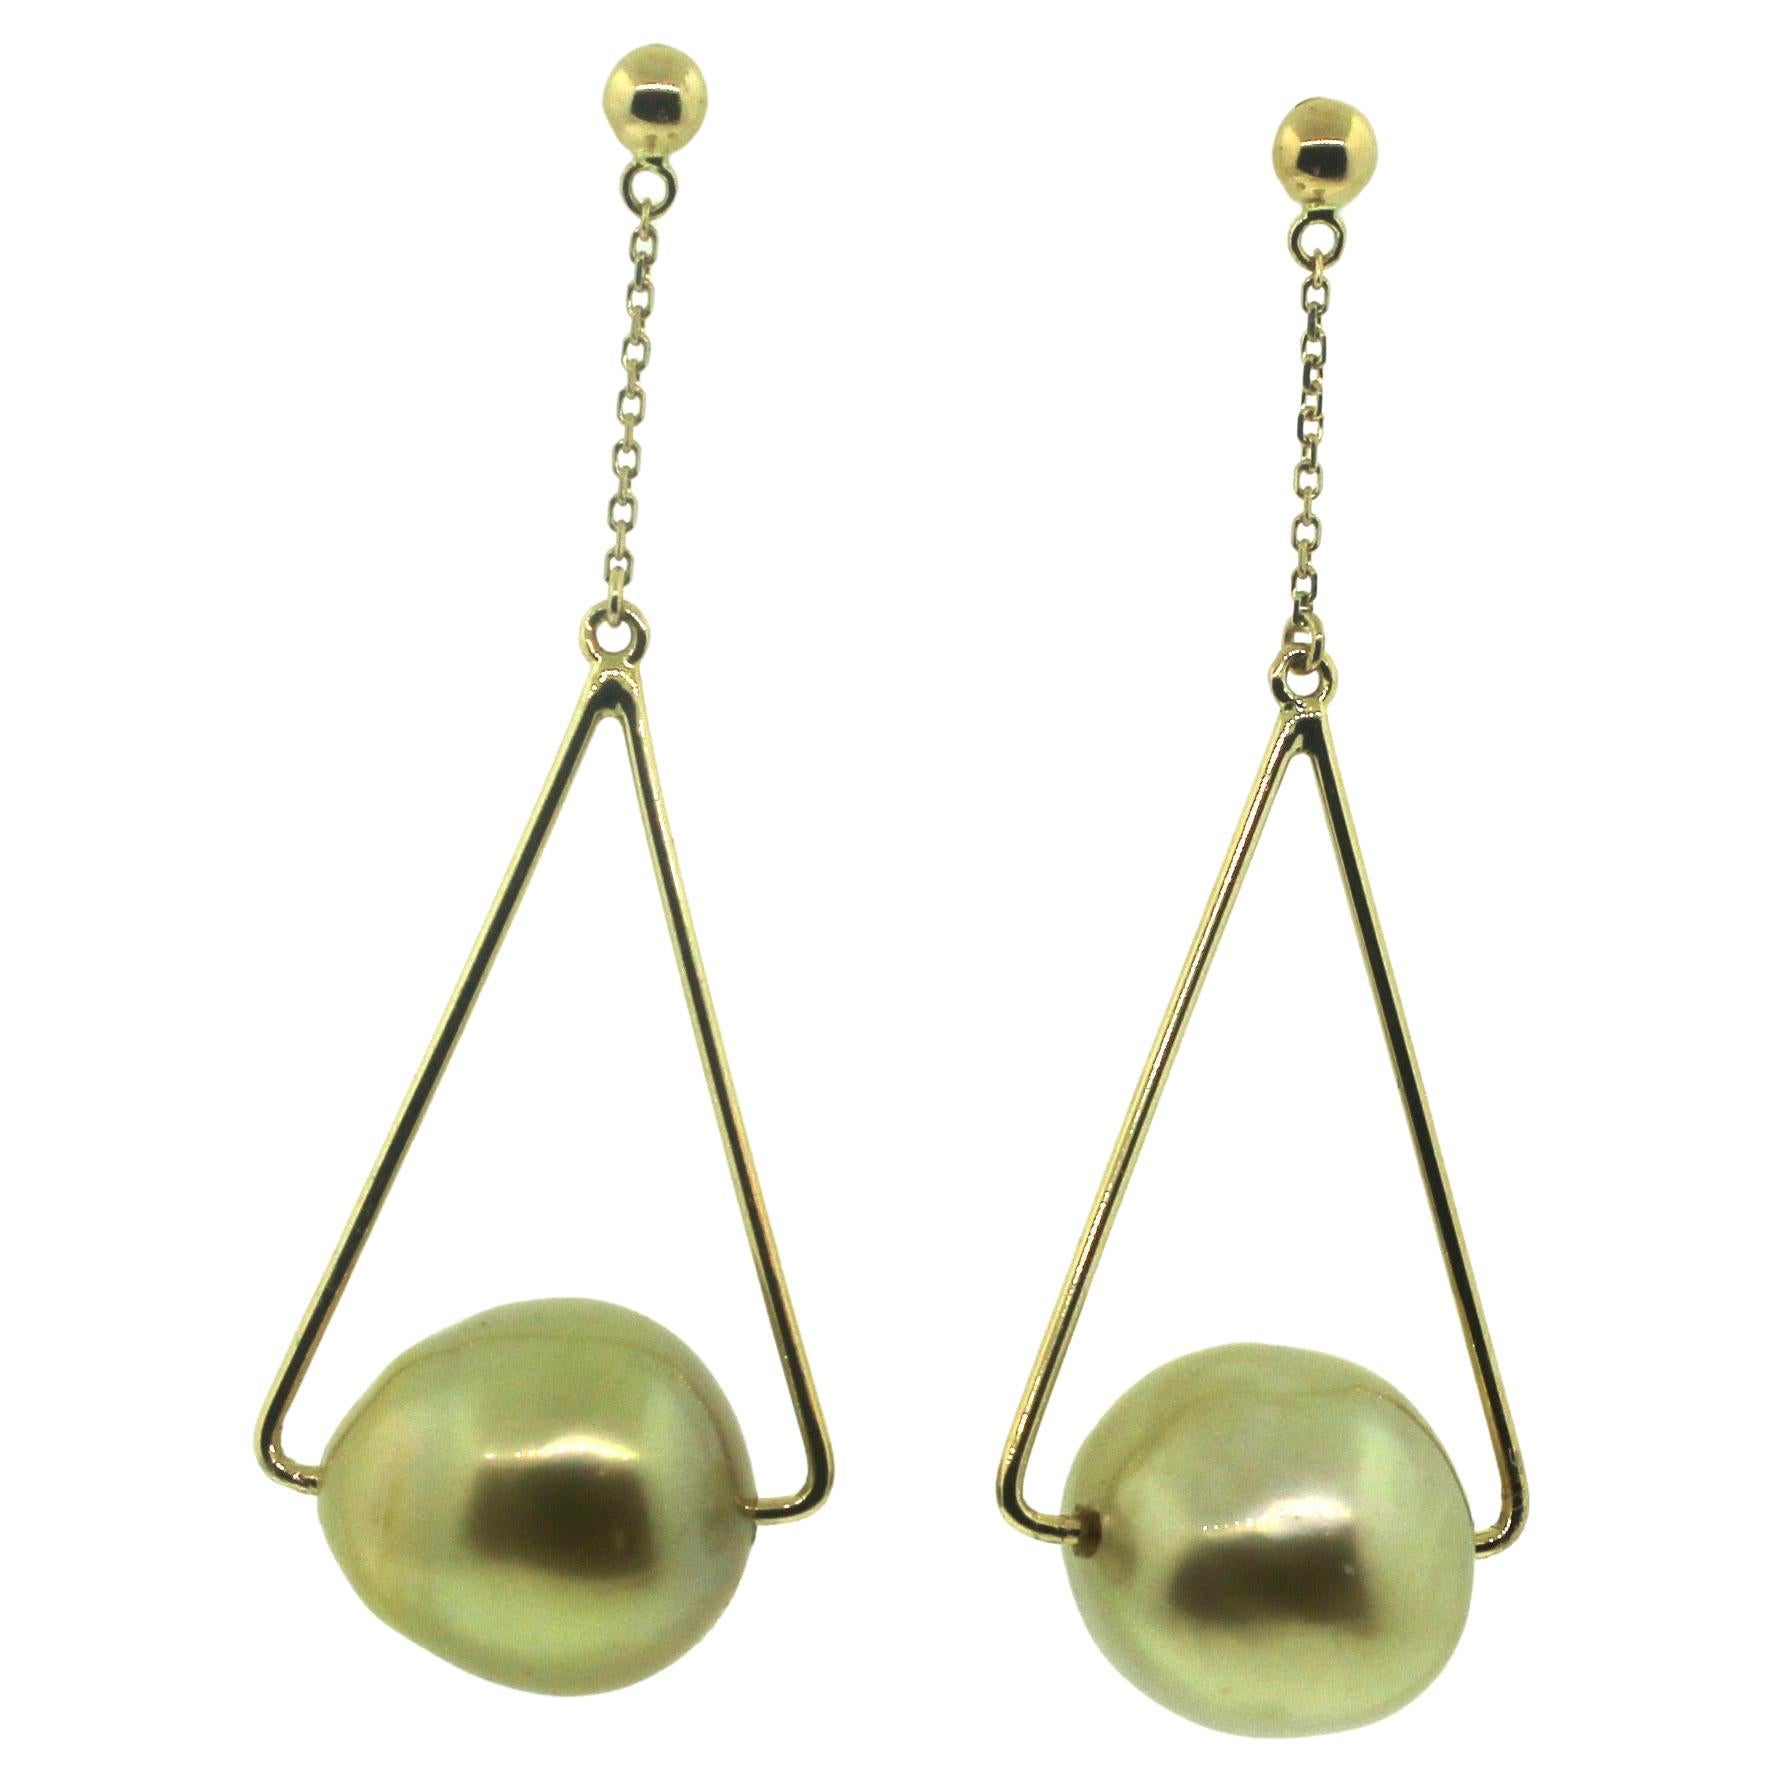 Hakimoto By Jewel Of Ocean
Manufacture Suggested Retail Price $2,000
11mm Dangling 18K Yellow Gold South Sea Pearl Earrings
